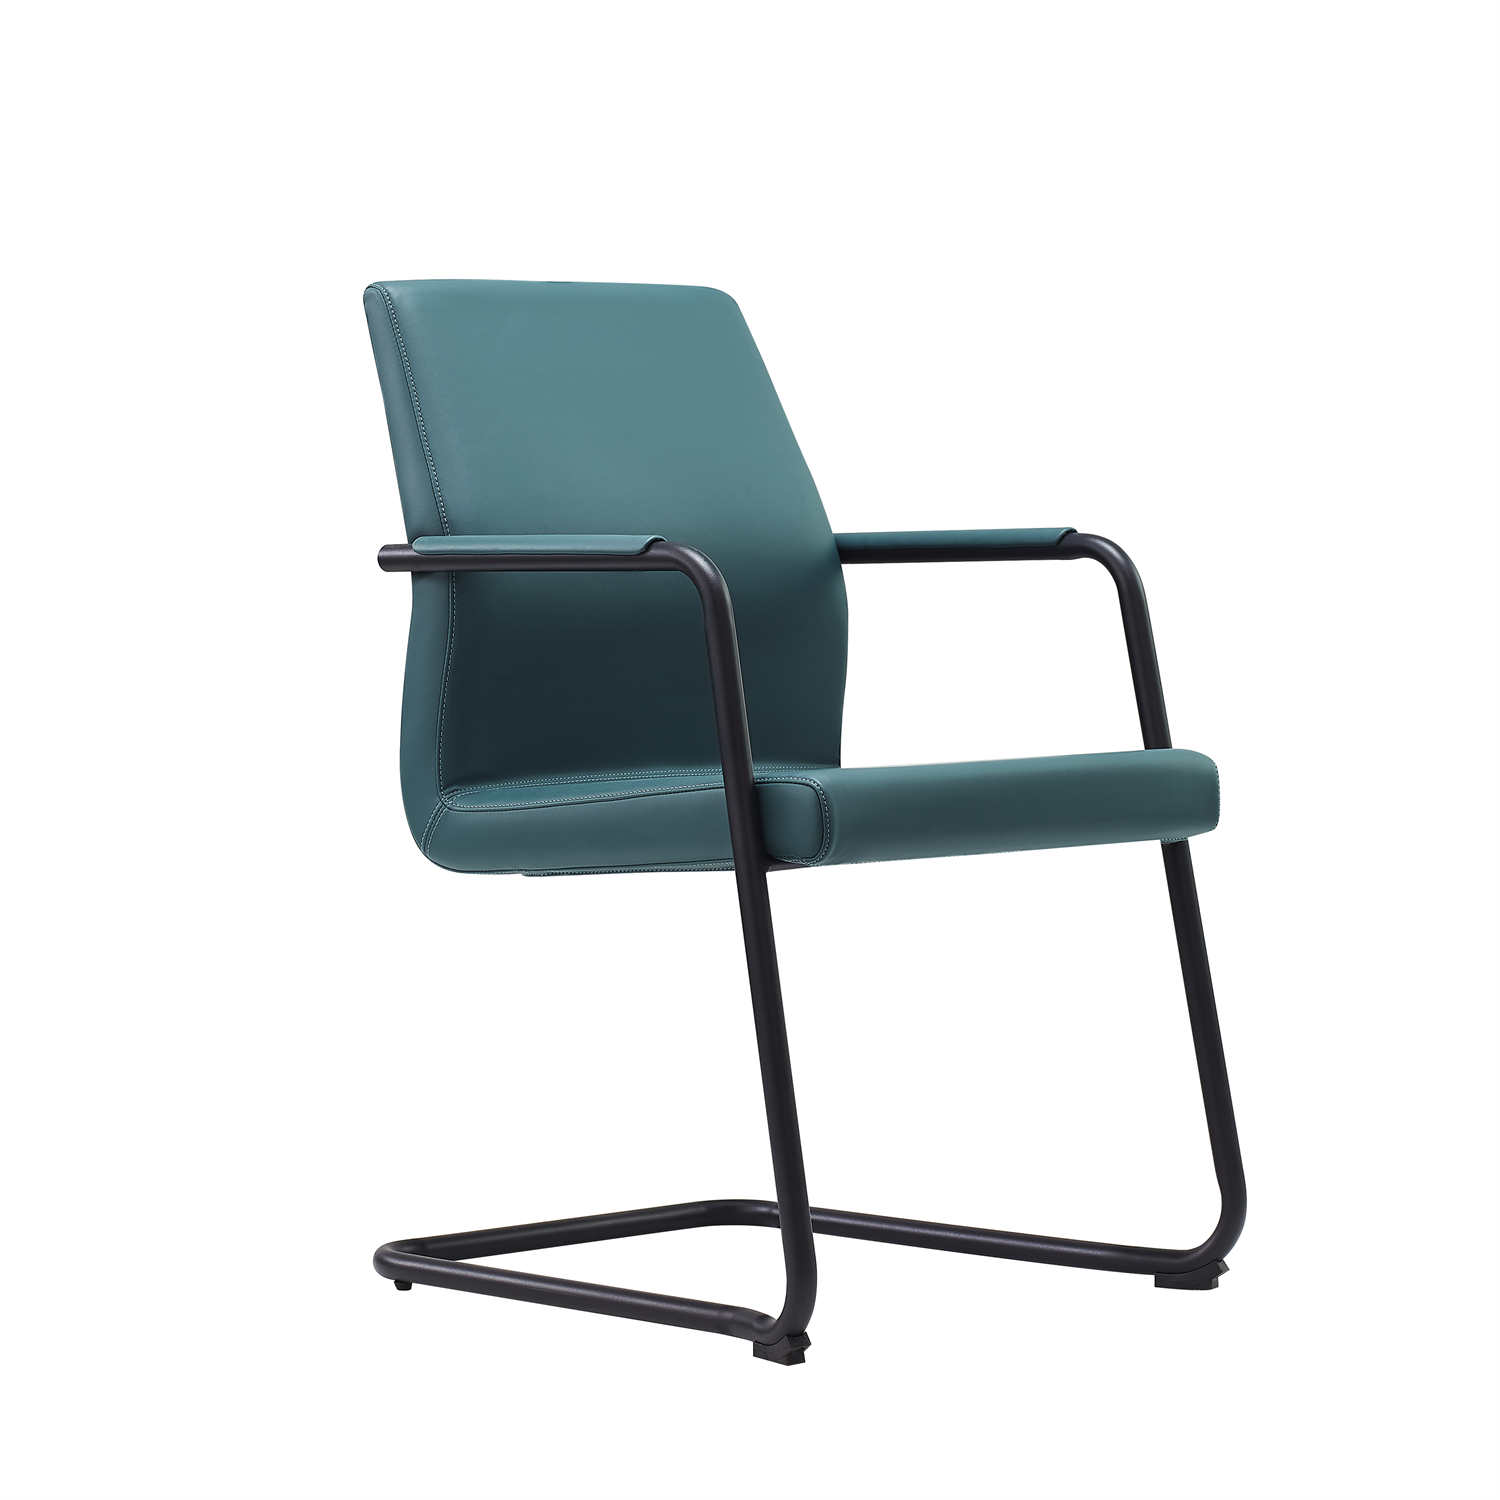 Fabric Leisure Chair For Conference(DU-1948C)